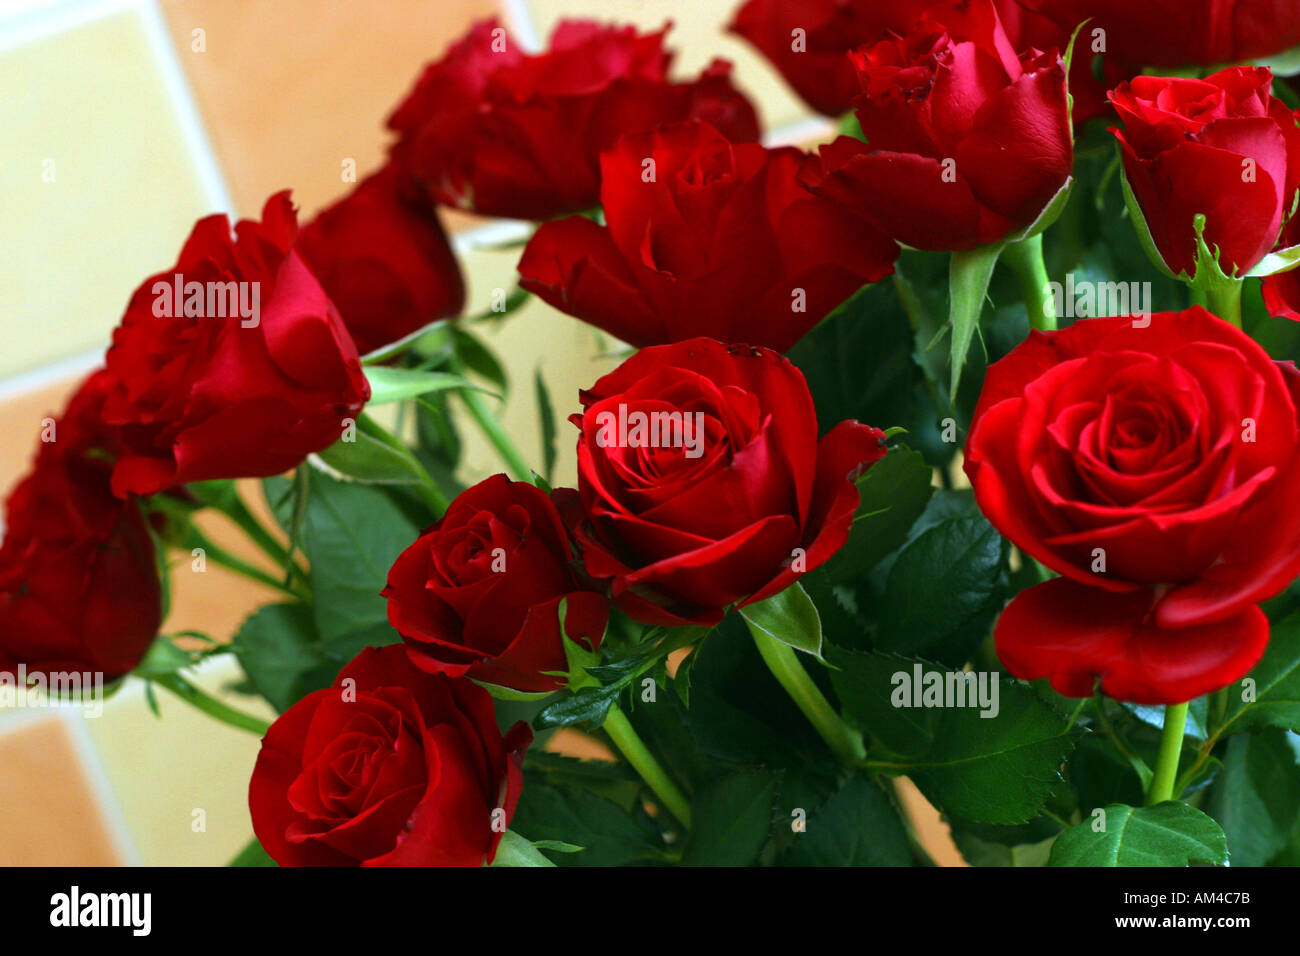 Bunch of Red roses, symbol of love Stock Photo - Alamy